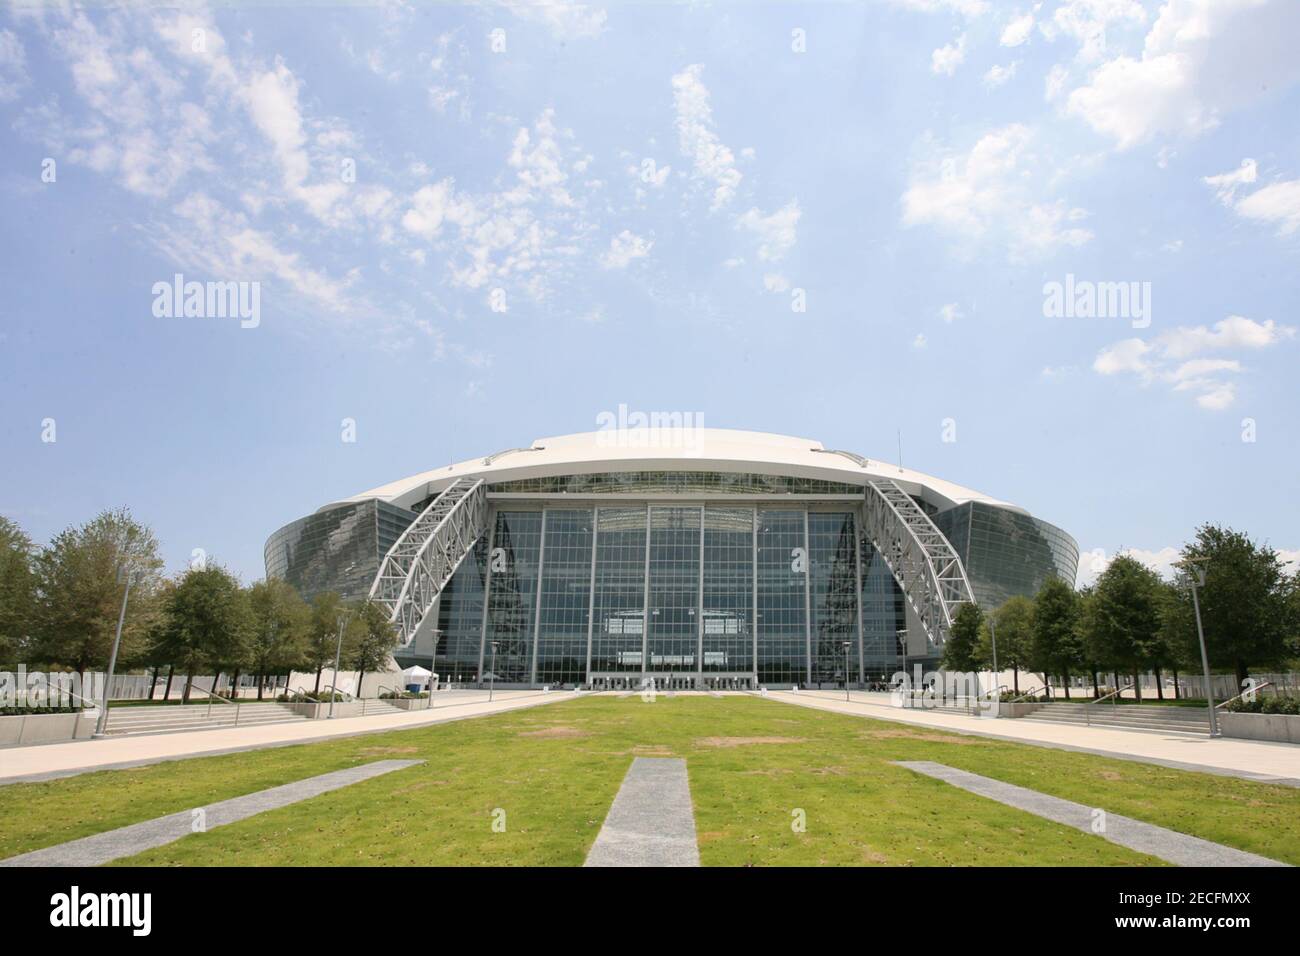 Dallas Cowboys Stadium during the 2009 CONCACAF soccer championship quarter-final matches on July 19 2009. Stock Photo